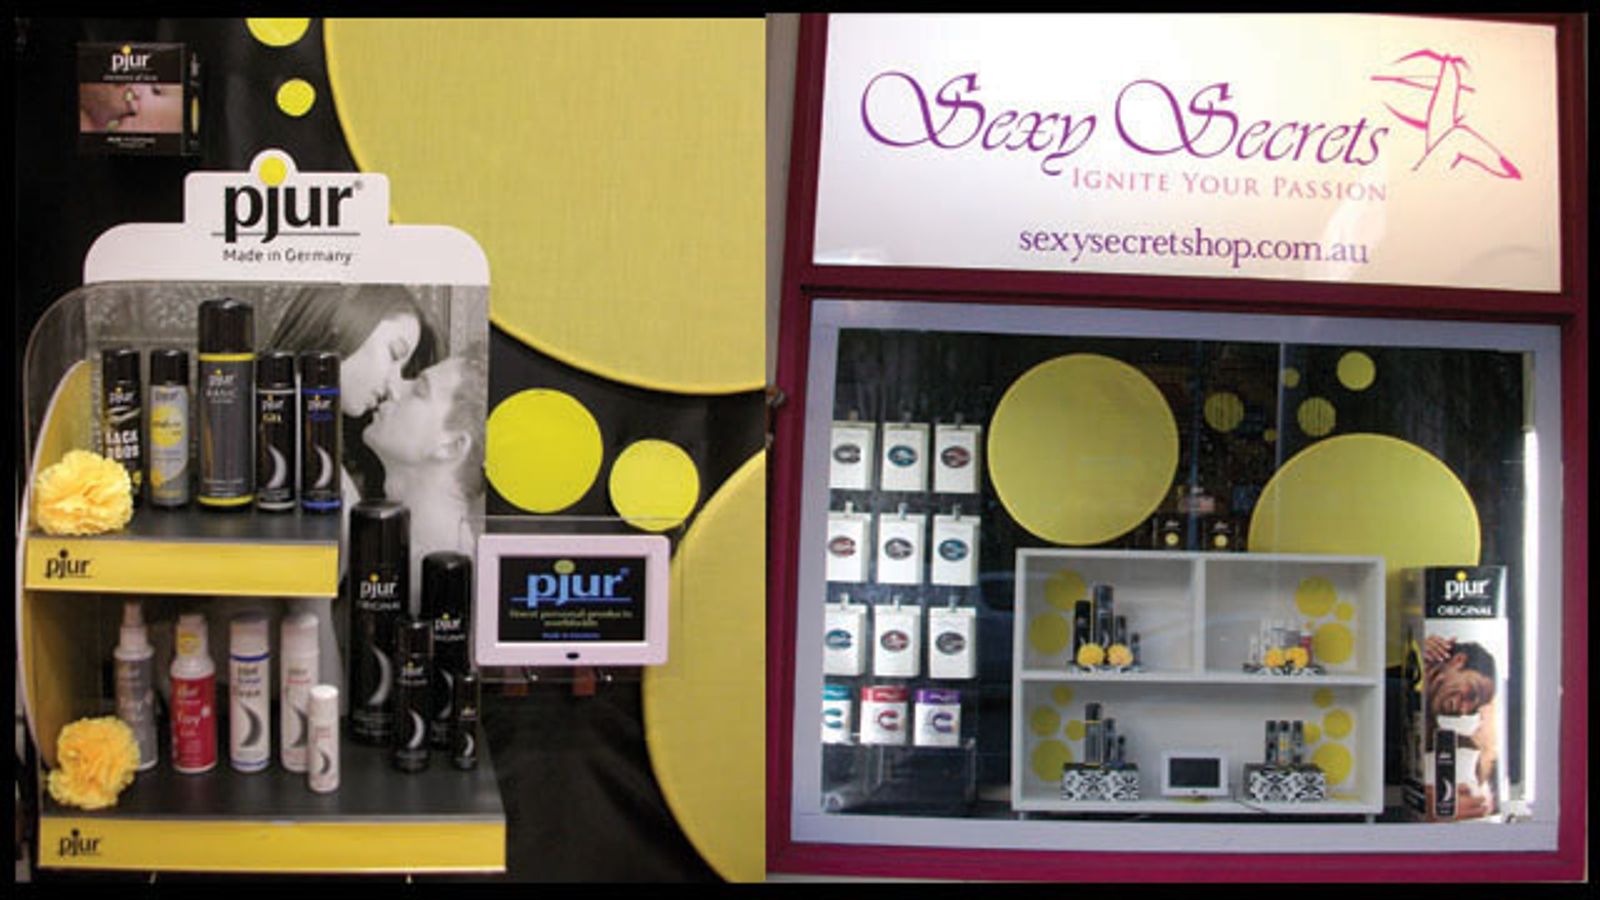 Sexy Secrets Impresses With Display Window Featuring pjur